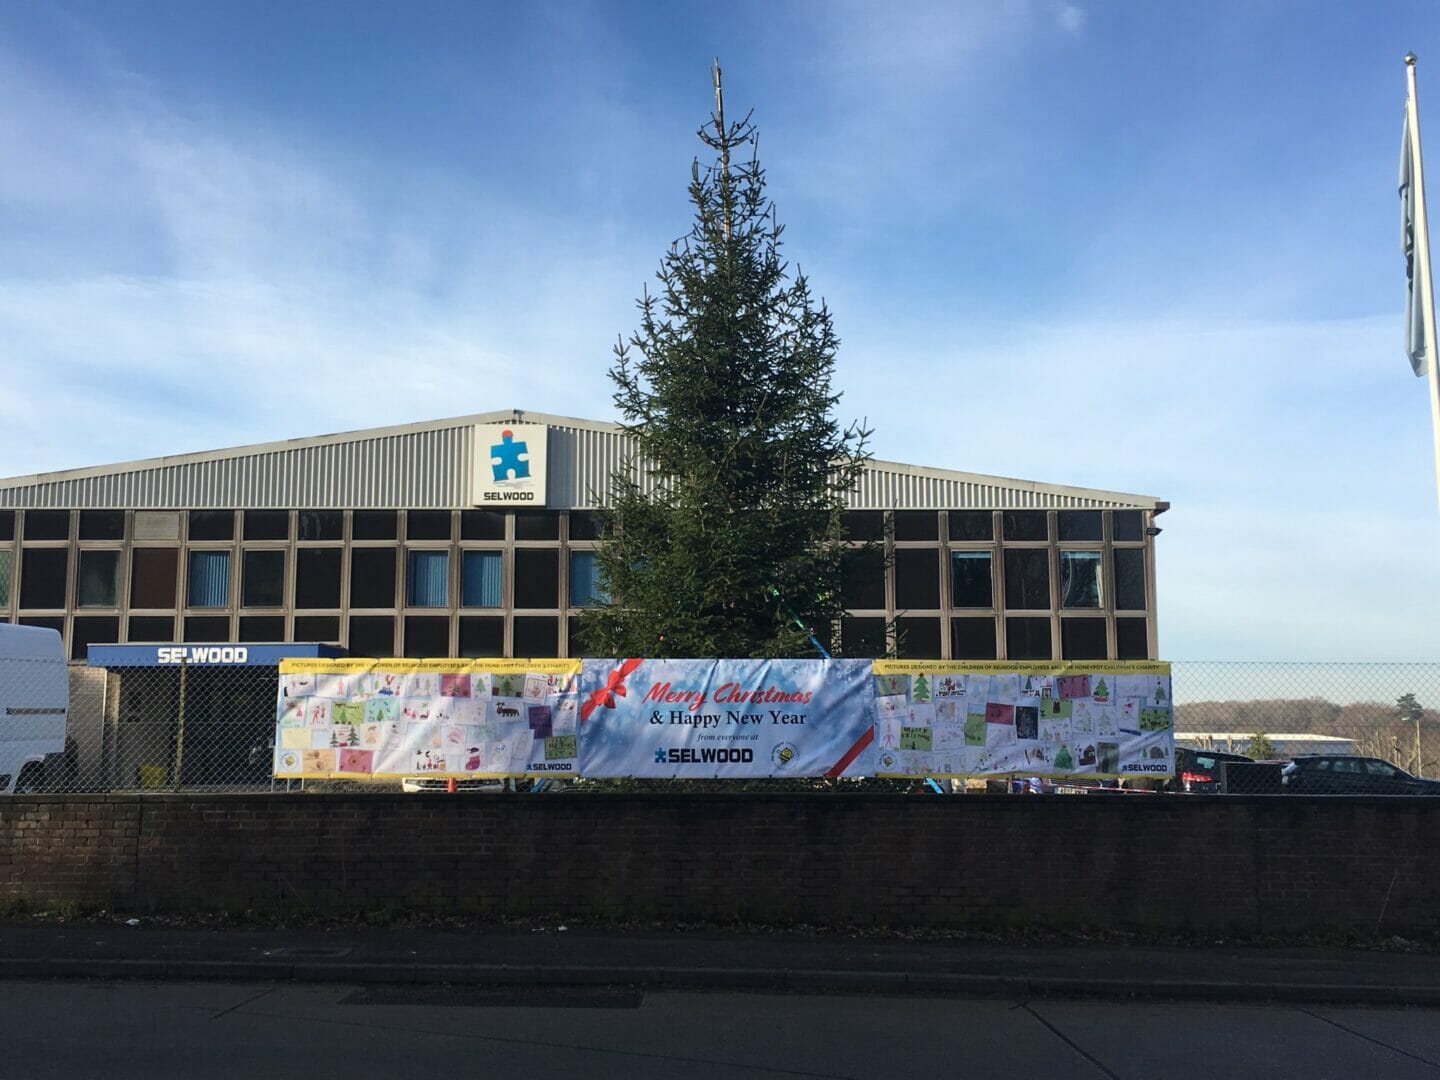 Selwood brings Christmas goodwill to community @Honeypotcharity @selwoodgroup